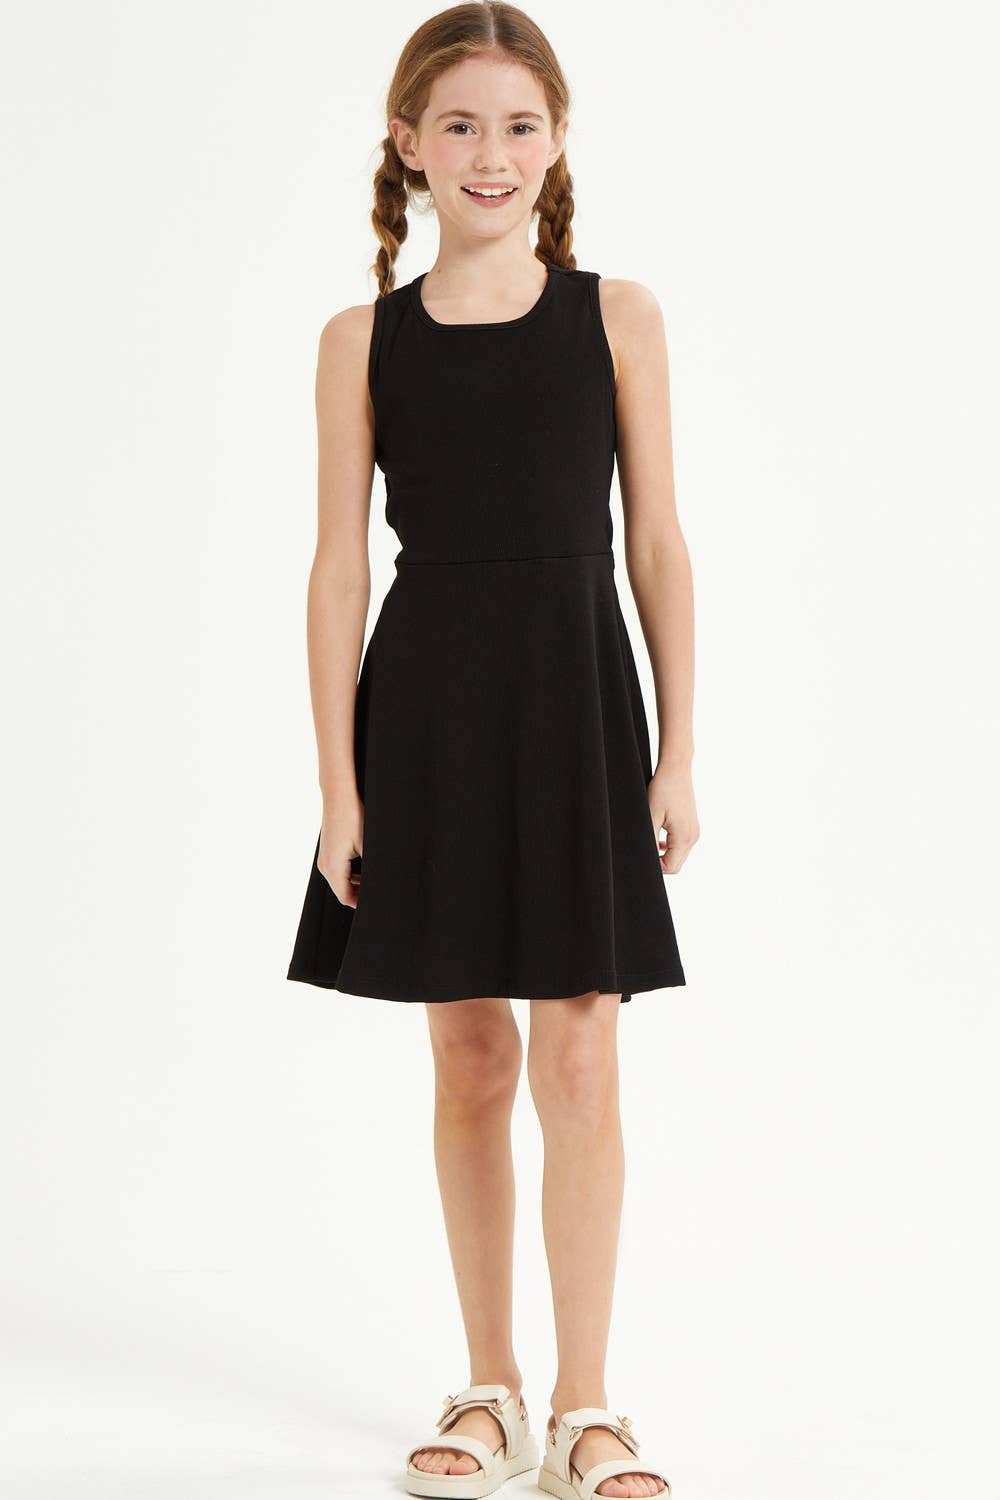 Cutout Back Sleeveless Fit and Flare Dress- Black